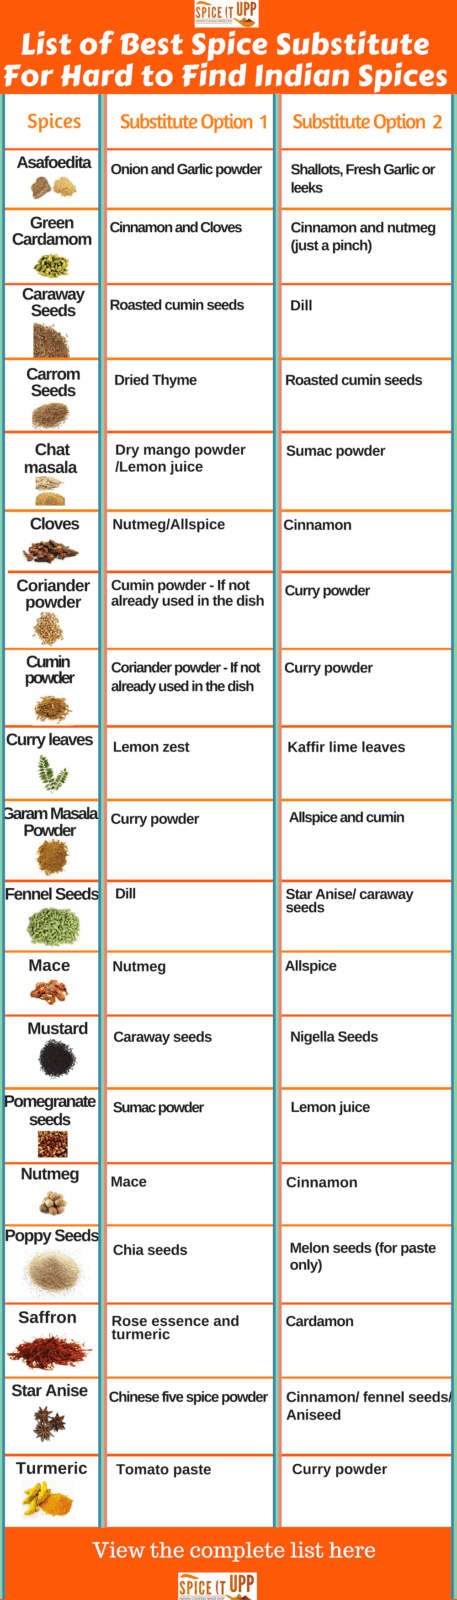 A useful list of Indian Spices with their best spice substitute Chart when you find it hard to find the Indian spices. #justspices #indianfoodblogger #spicelist #indianspicelist #substituteforcardamom # substituteforchatmasala #spicesubstitute #cookingwithspices #spicepantry #foodofindia #tasteofindia #spiceologist #spiceitupp #indianfoodtips